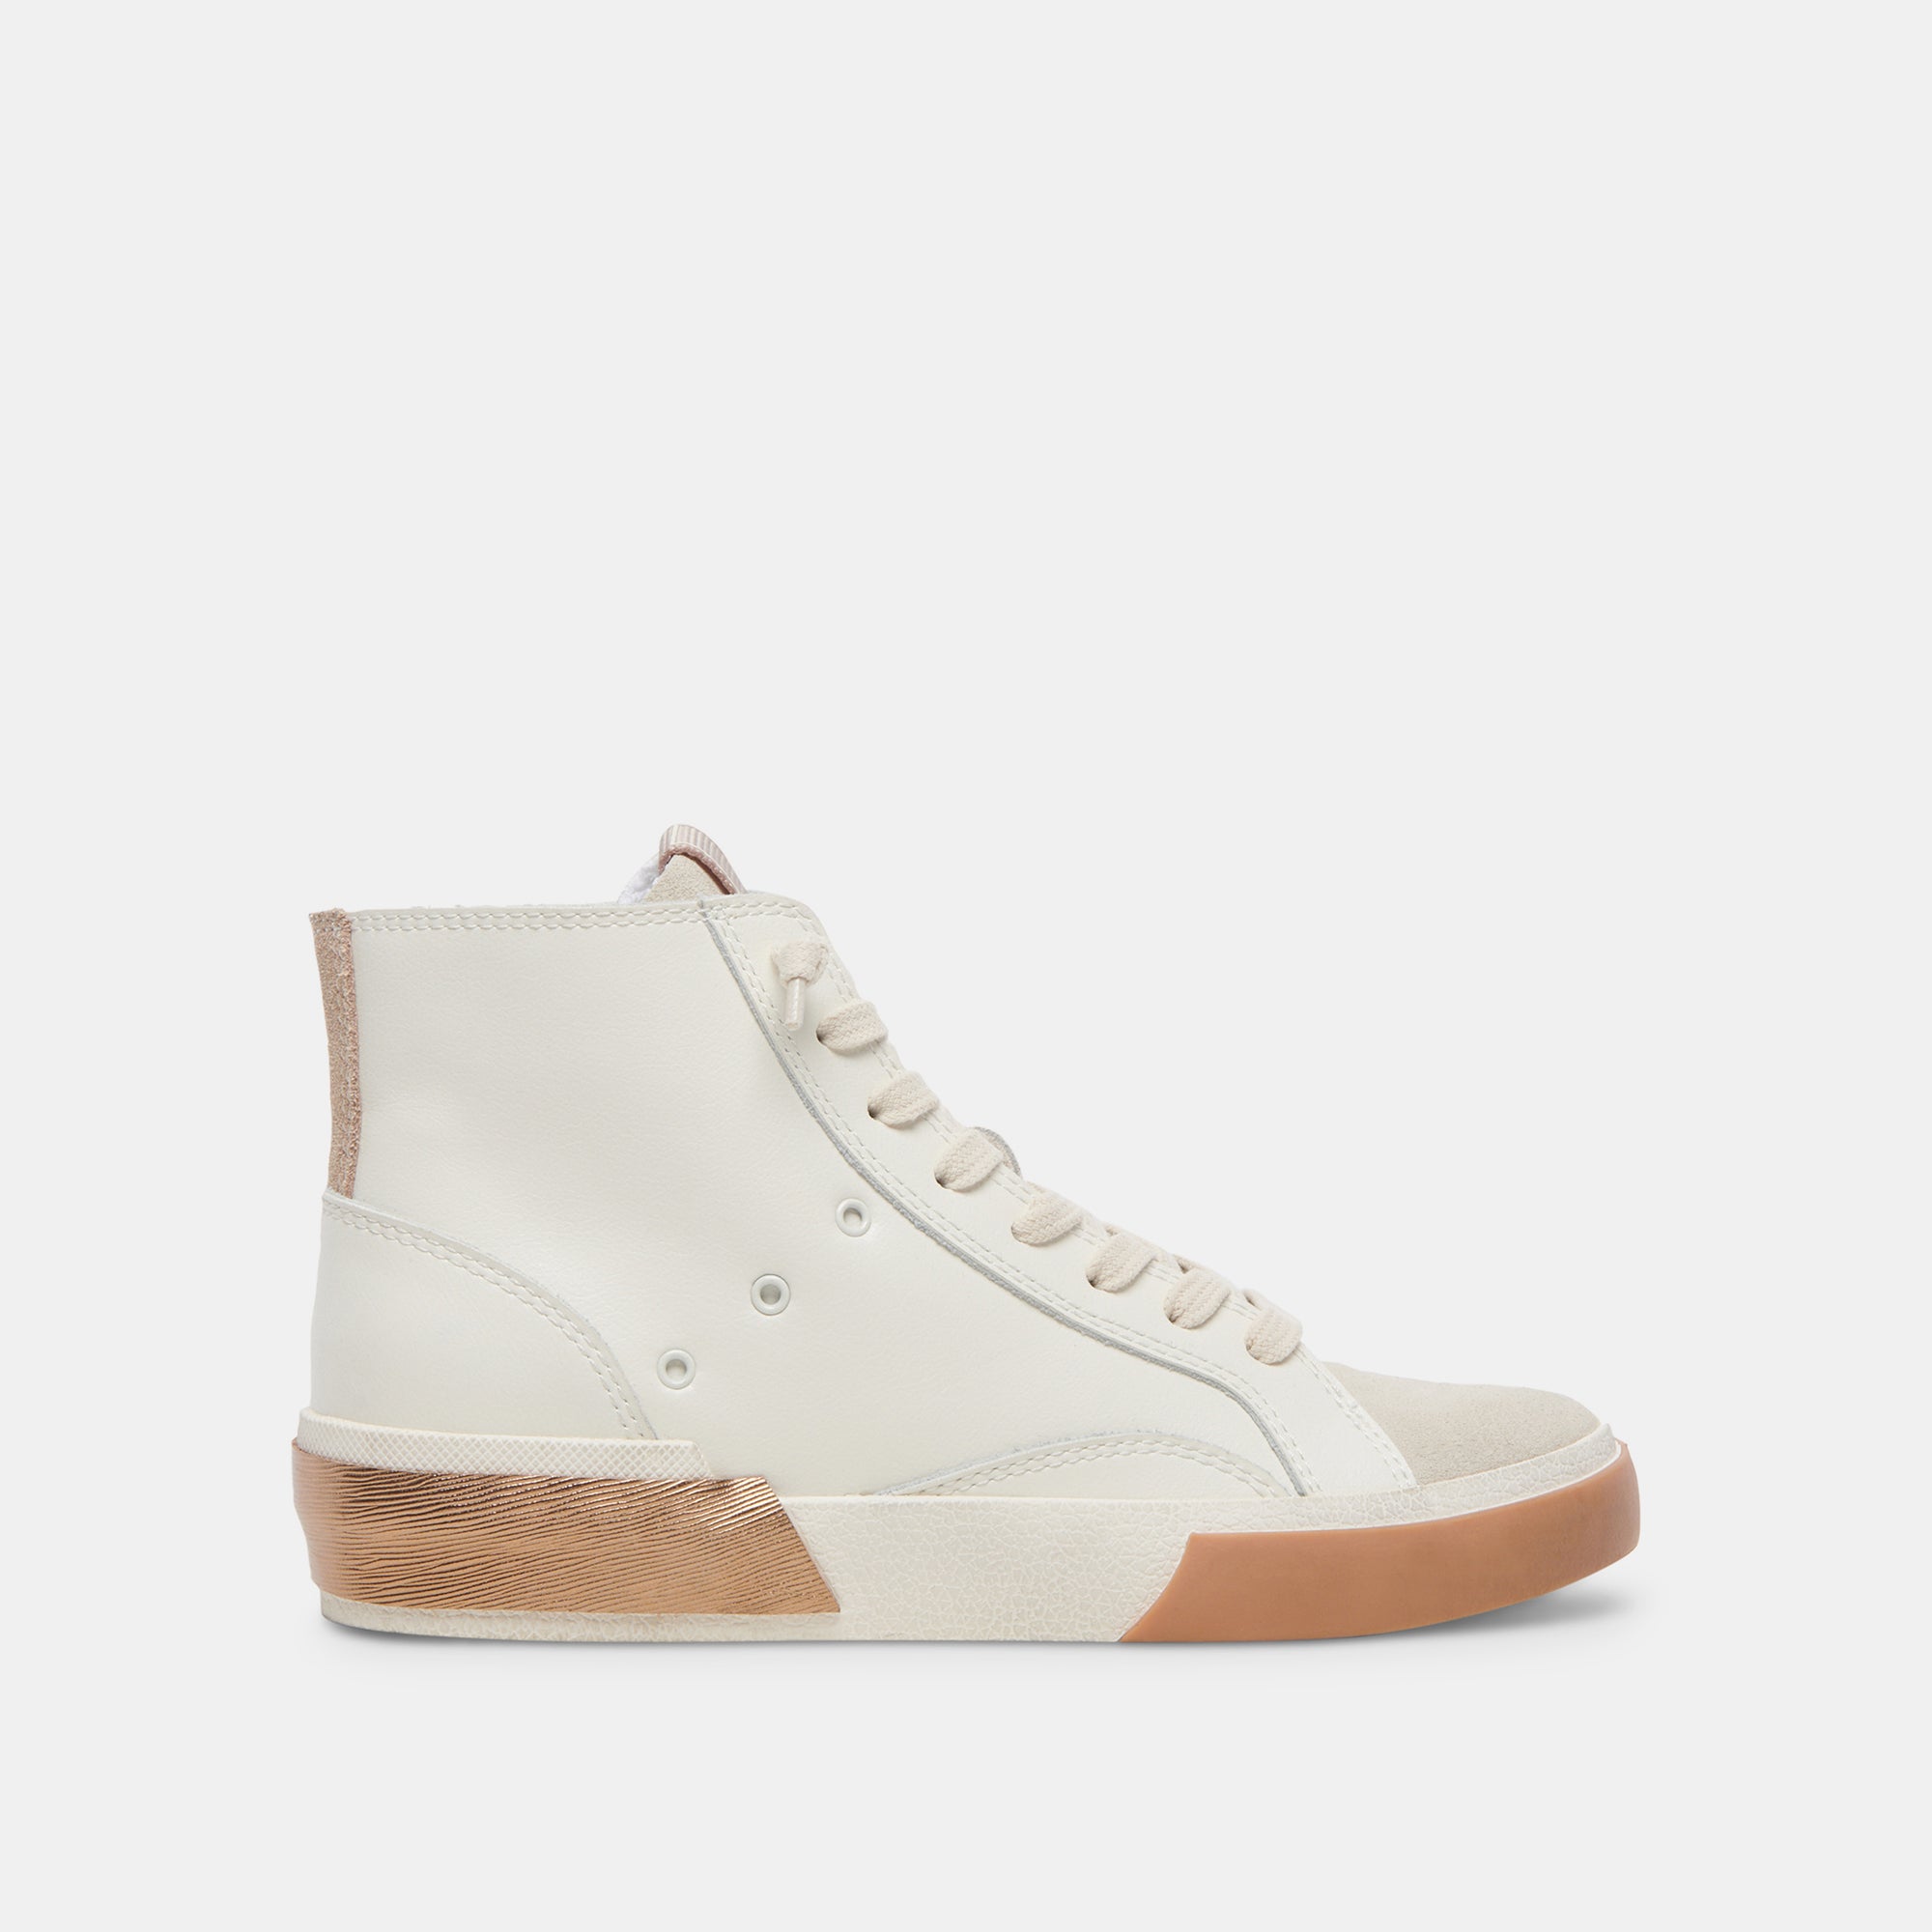 Zohara Sneakers White Tan Leather | Women's High-Top Sneakers – Dolce Vita